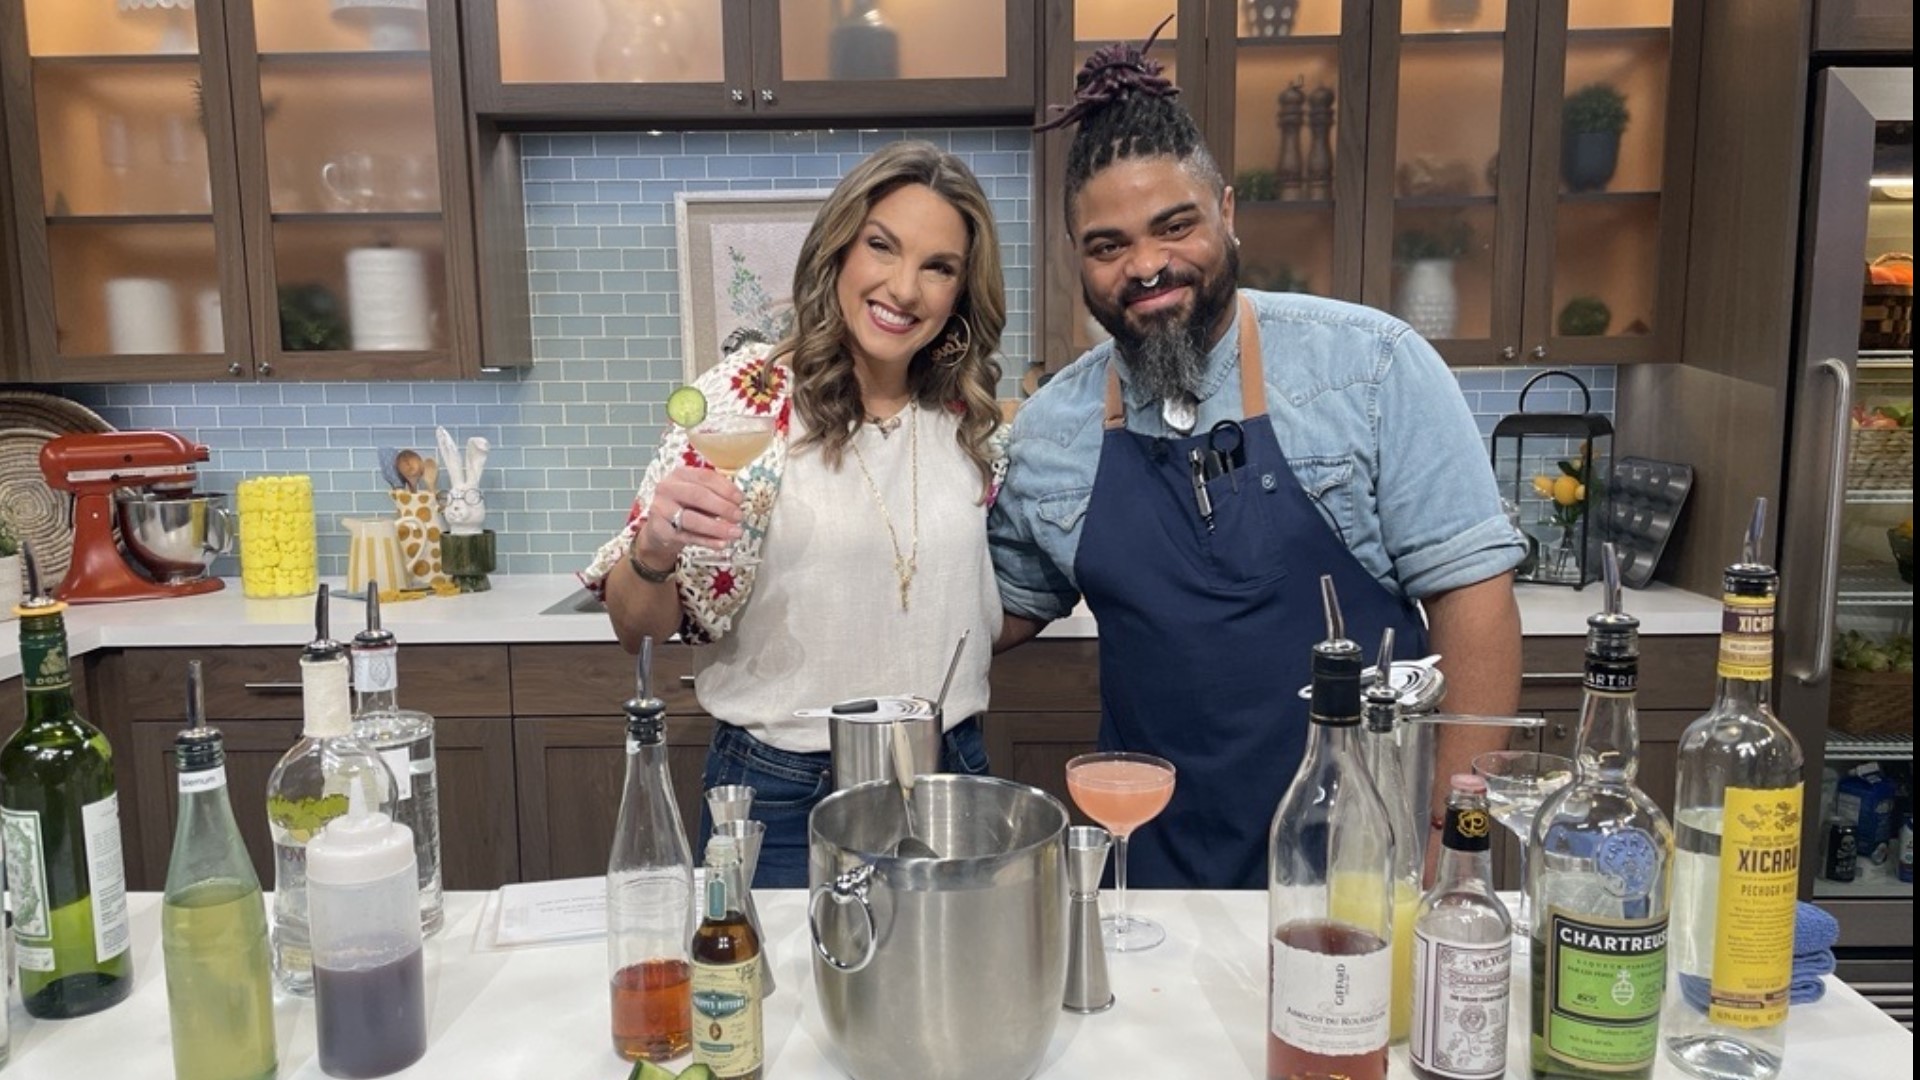 Bartender Sean Cates-McDonald shows Amity three spring-inspired cocktails from Coastal Kitchen's new spring menu launching March 29. #newdaynw